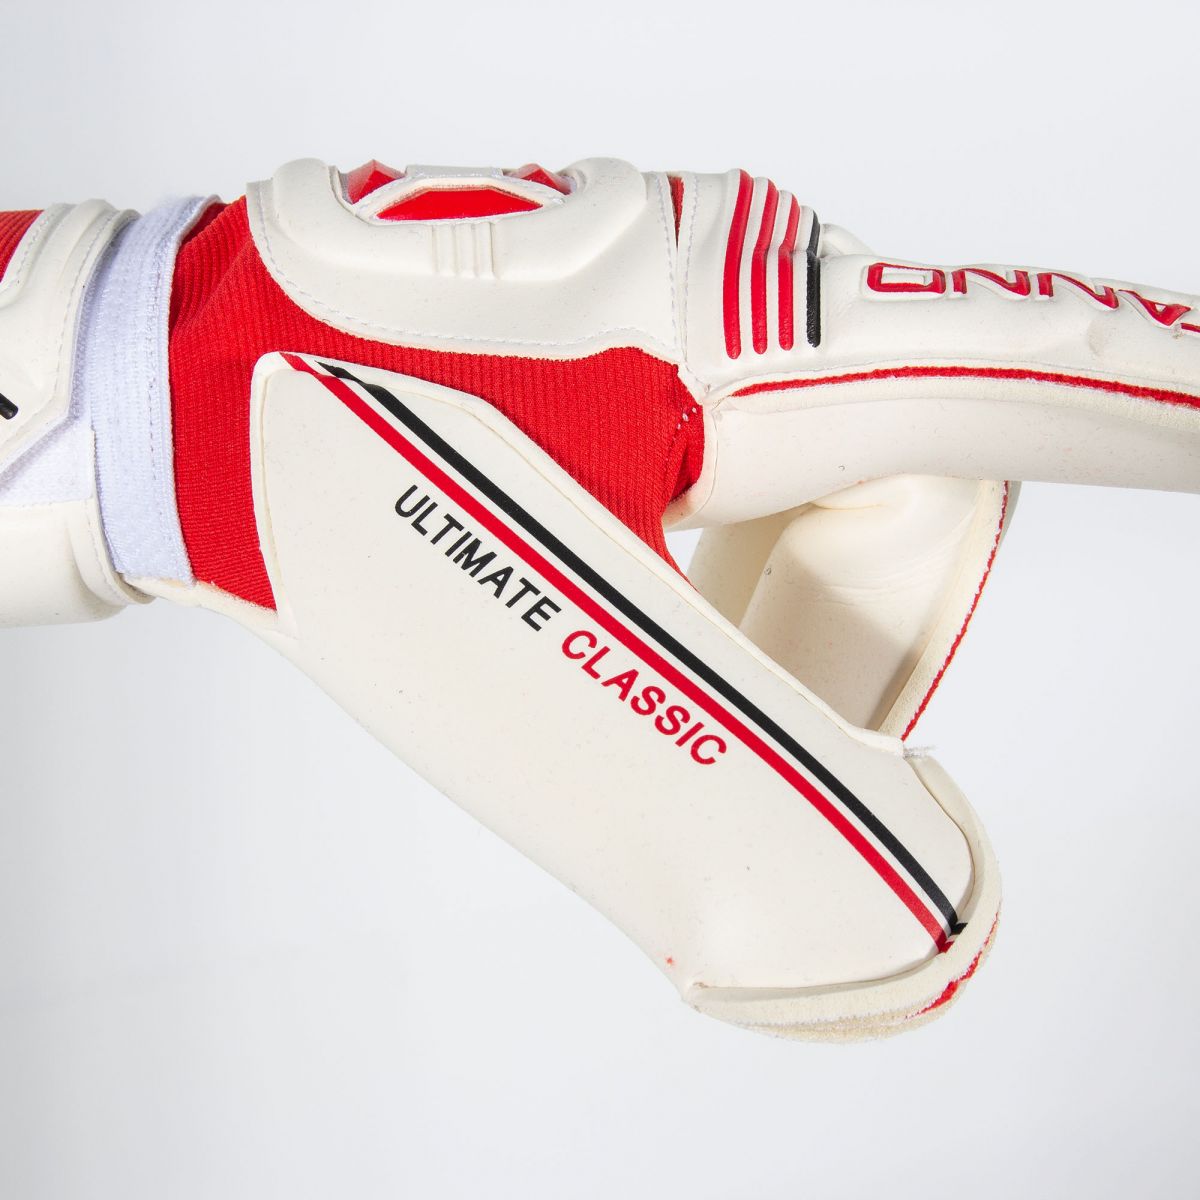 Stanno Ultimate Grip II